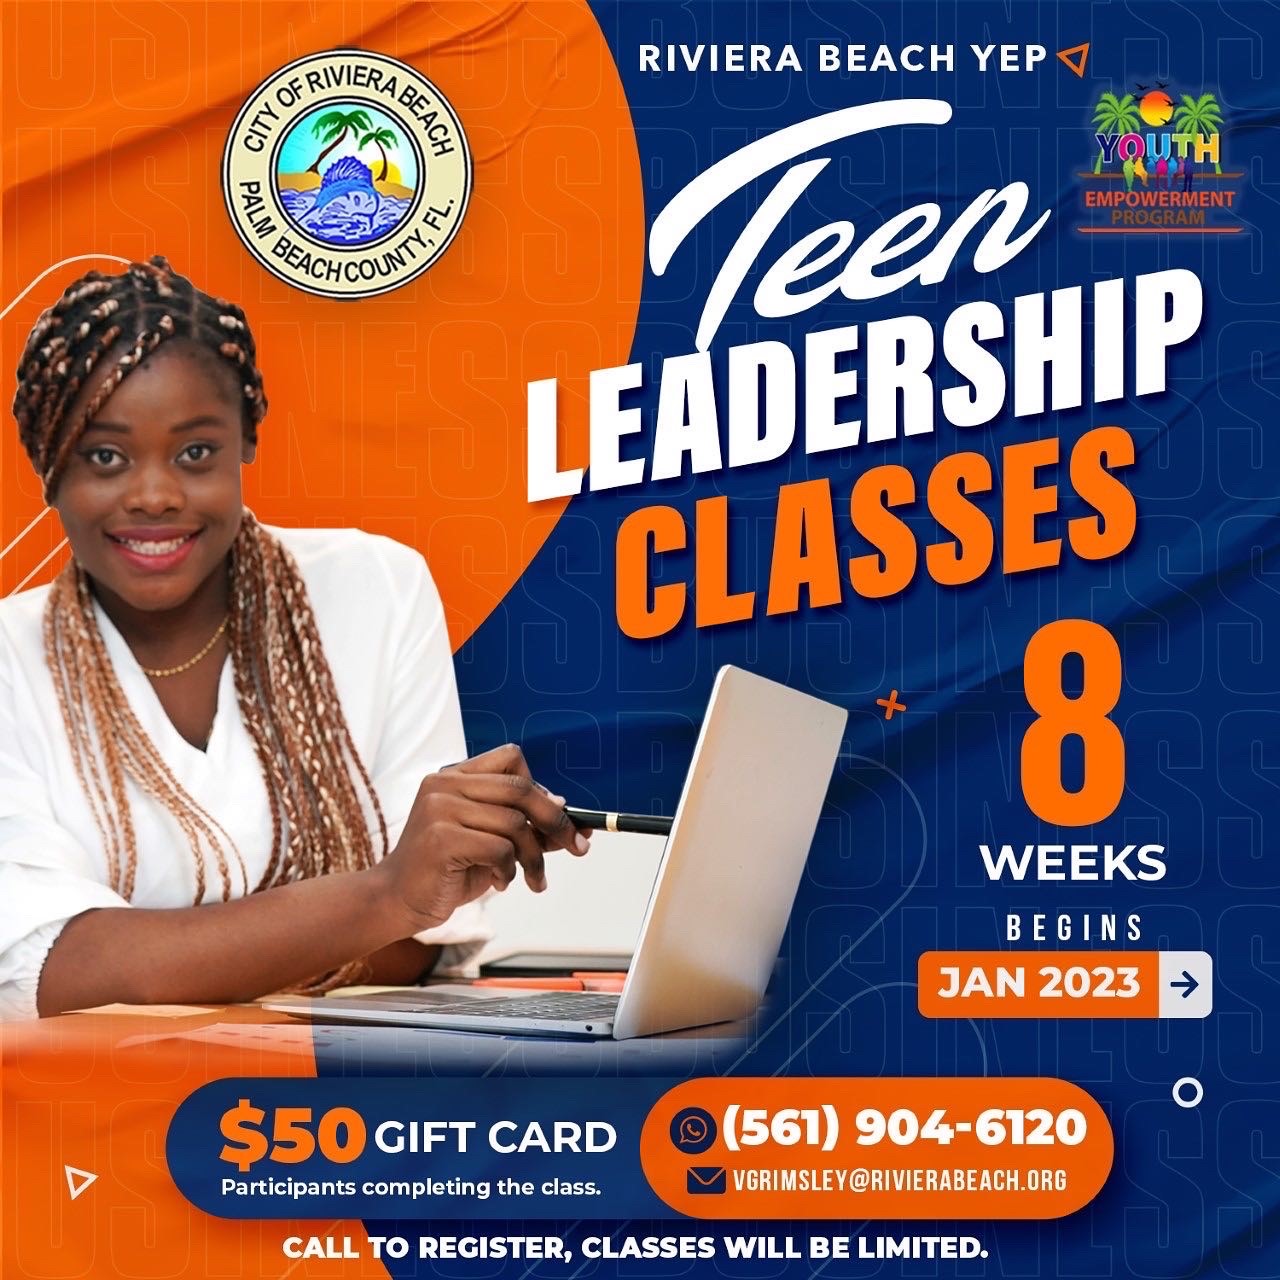 RIVIERA BEACH YEP Veer YQUTI EMPOWERMENT LEADERSHIP CLASSES 8 WEEKS BEGINS JAN 2023 =) $50 GIFT CARD Participants completing the class. (561) 904-6120 VGRIMSLEY@RIVIERABEACH.ORG CALL TO REGISTER, CLASSES WILL BE LIMITED.